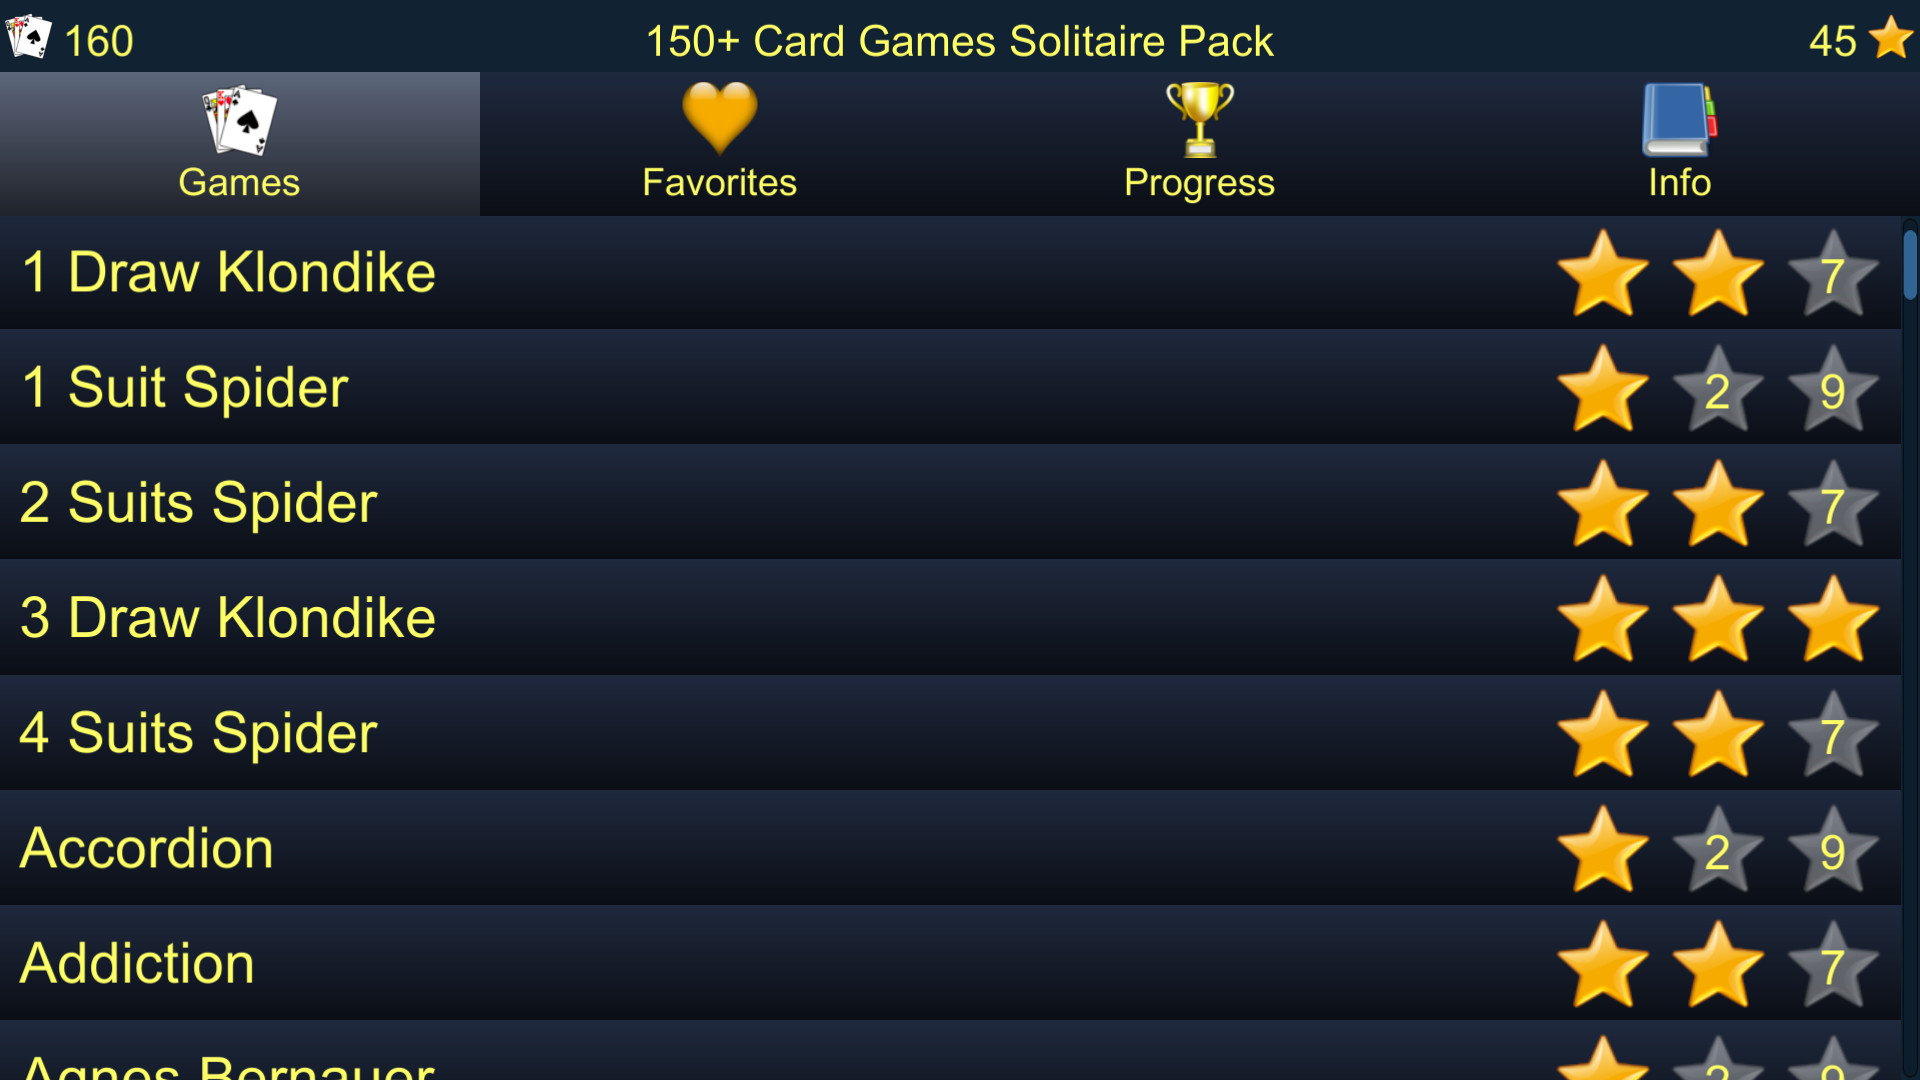 150+ Card Games Solitaire Pack Steam CD Key 0.63$